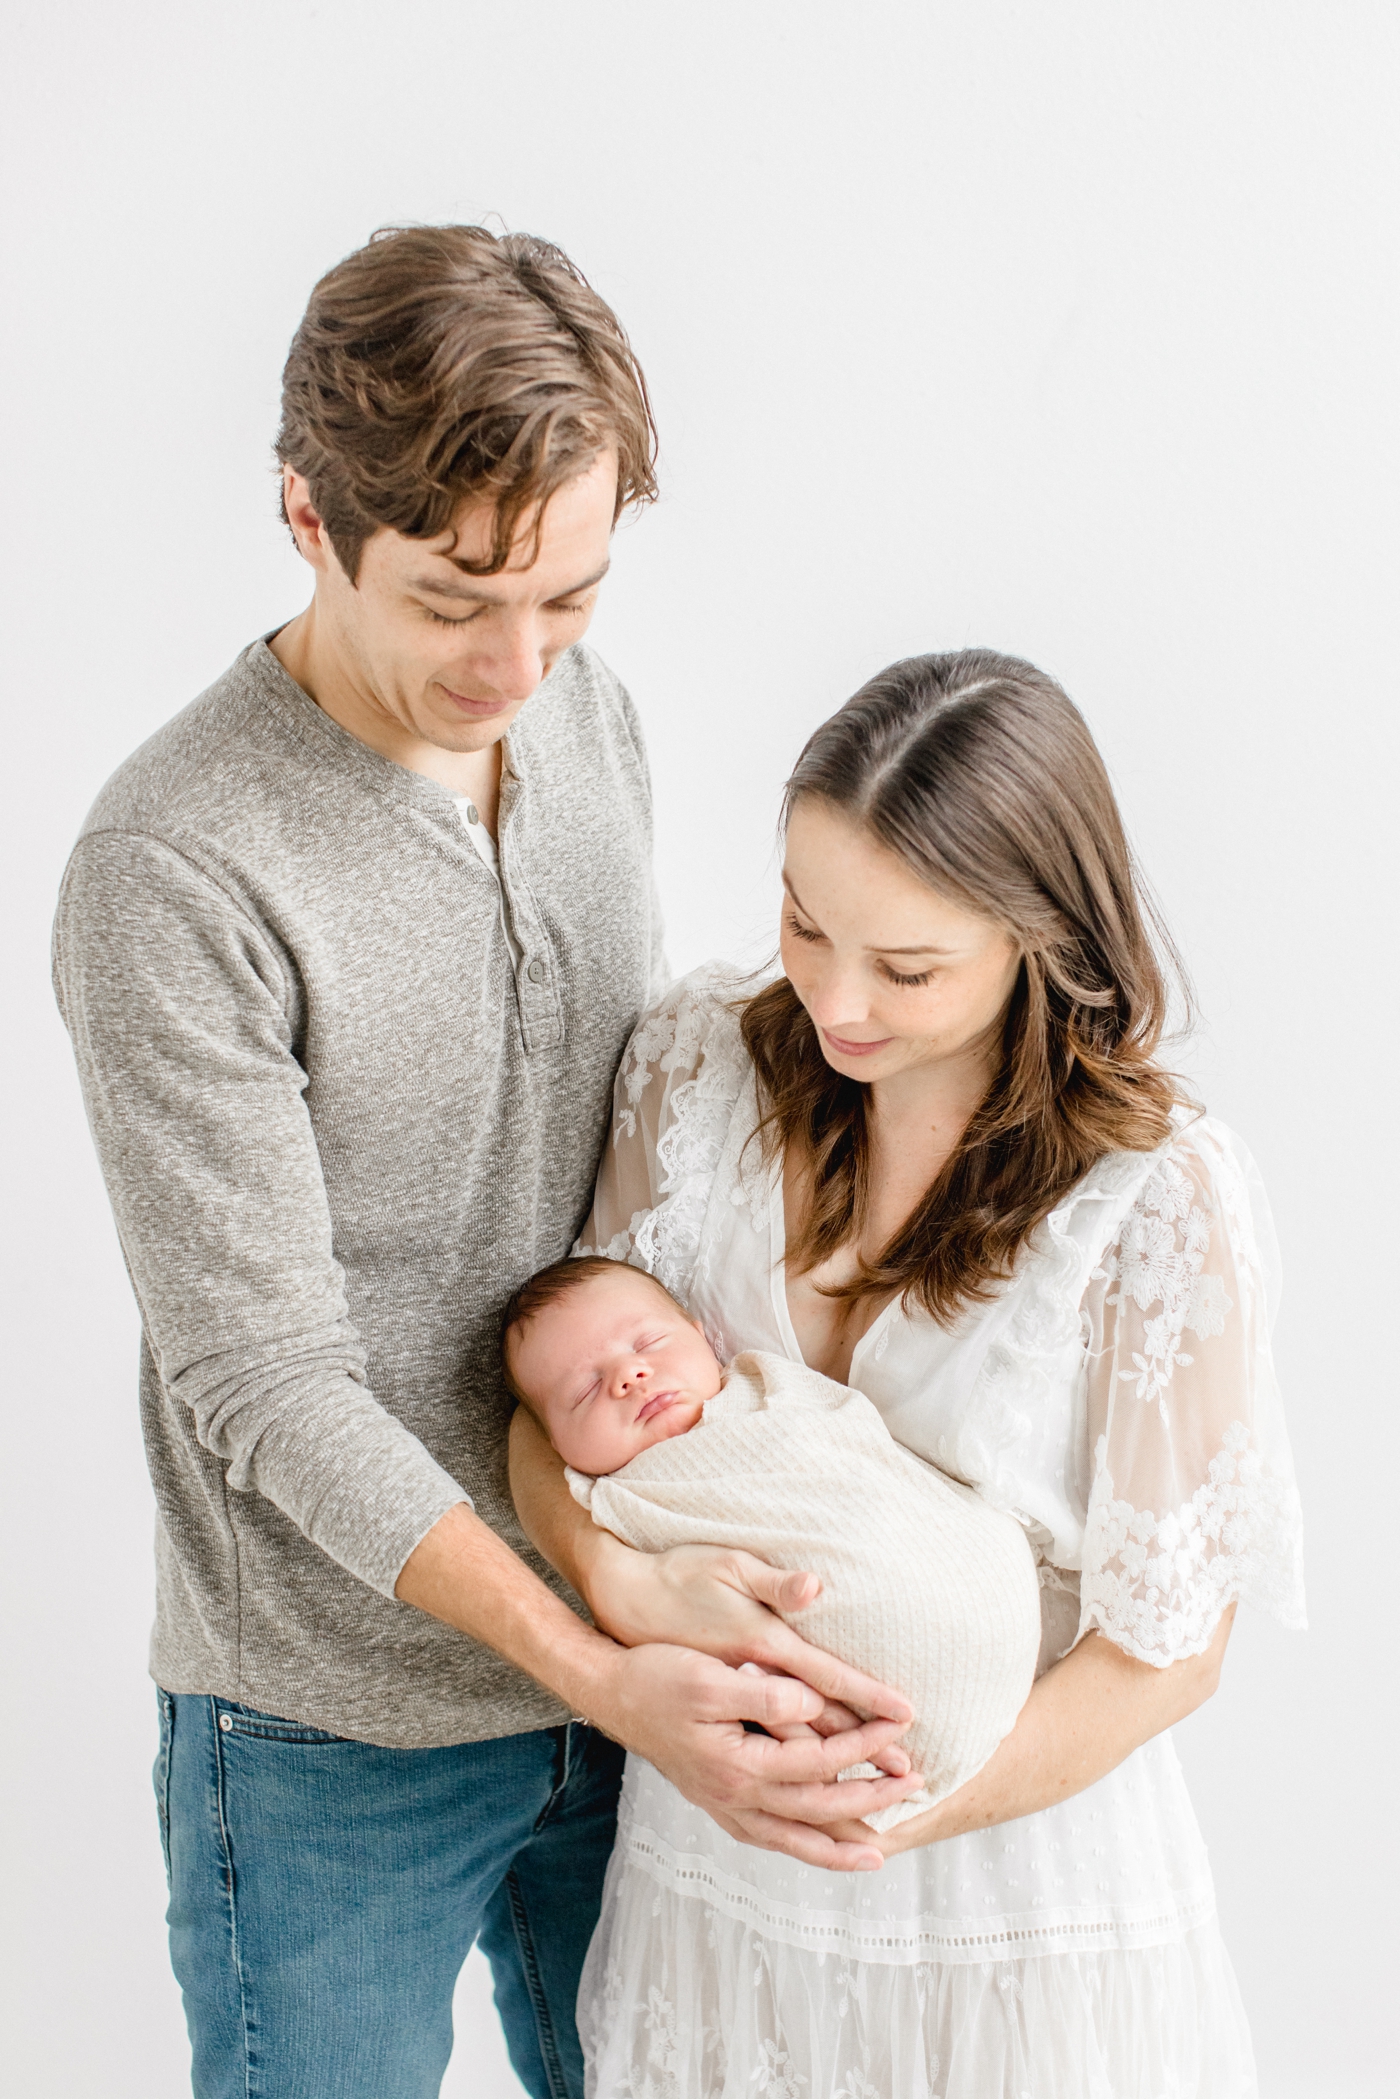 Mom and Dad holding baby during newborn photography session in Austin, TX. Photo by Sana Ahmed Photography.